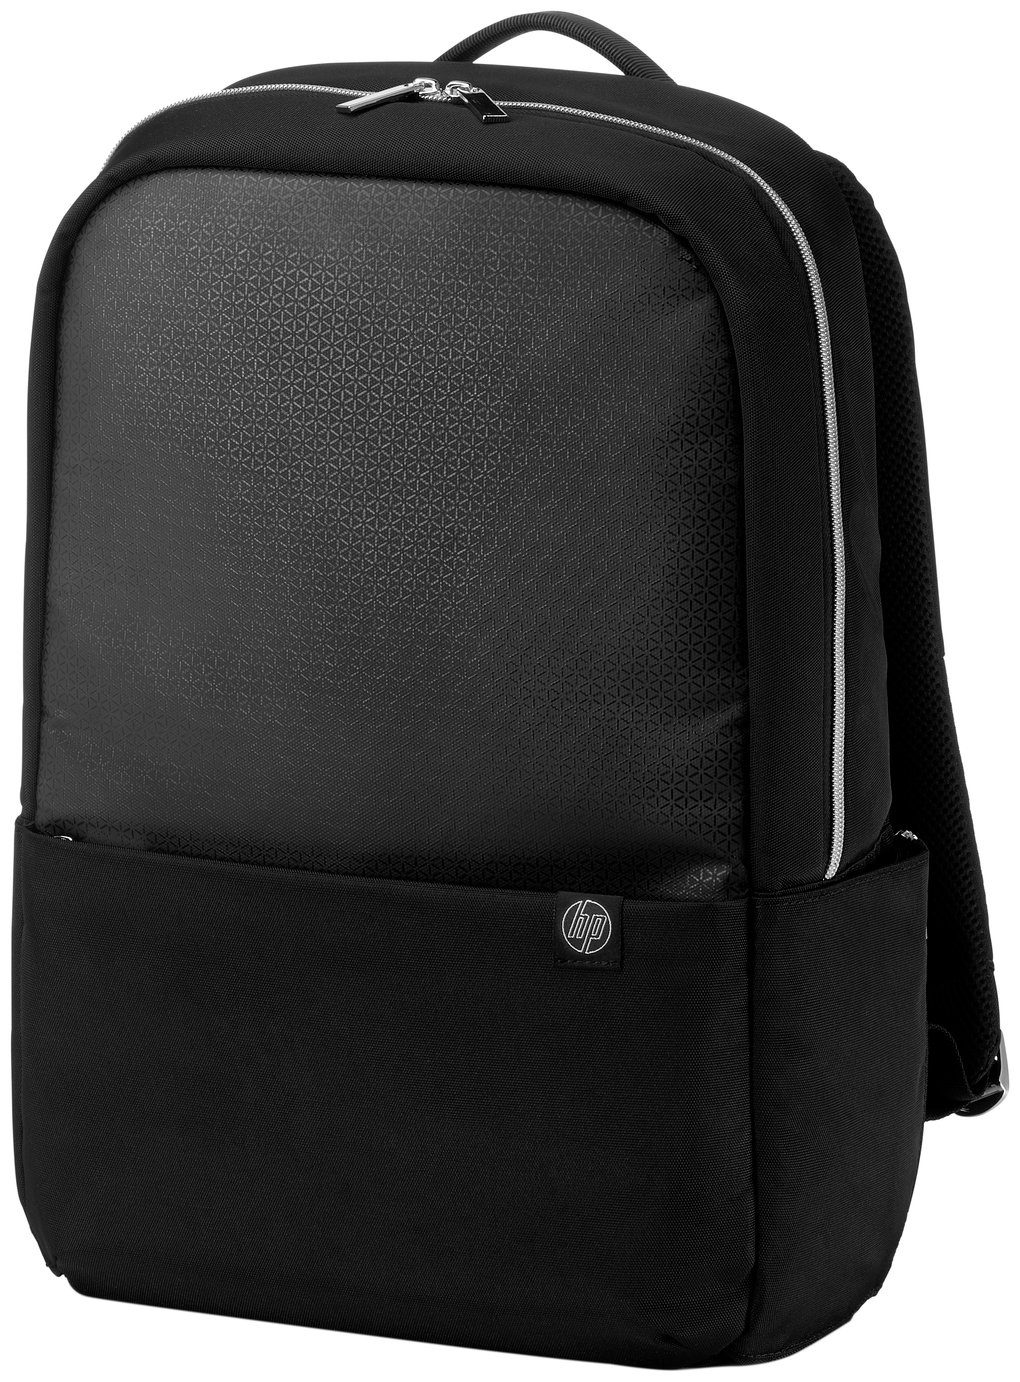 HP Duotone 15.6 Inch Laptop Backpack Review